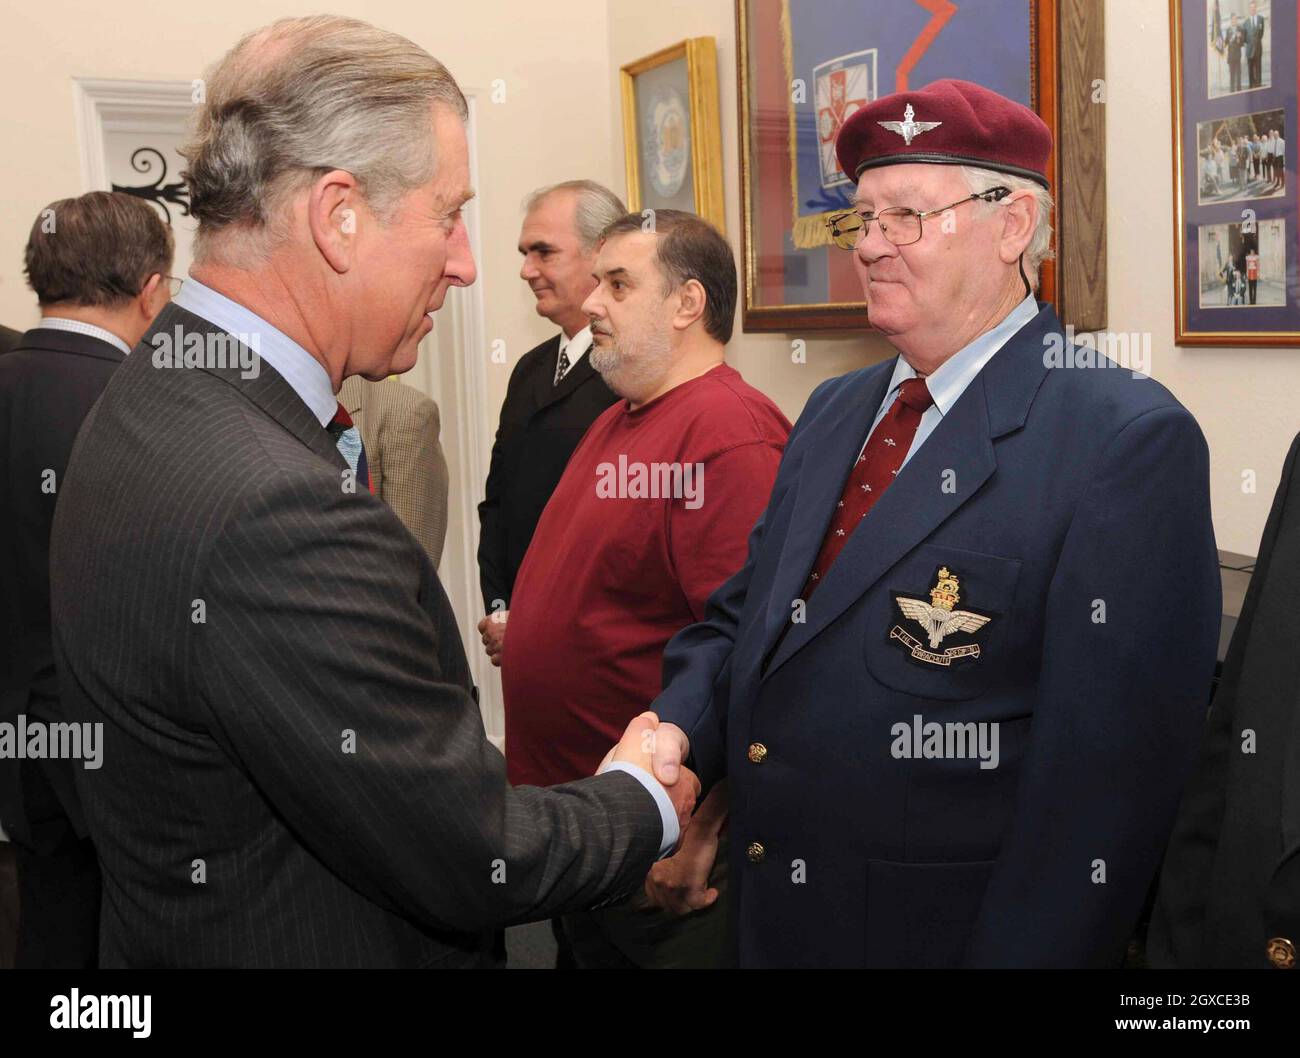 Prince Charles, Prince of Wales, Patron of the Ex-Services Mental Welfare Society, meets ex-paratrooper Kevin Gillen in the treatment centre when he visits Tyrwhitt House in Leatherhead. The Ex-Services Mental Welfare Society, Combat Stress, is the only services charity specialising in helping those of all ranks from the Armed Forces and the Merchant Navy. Stock Photo